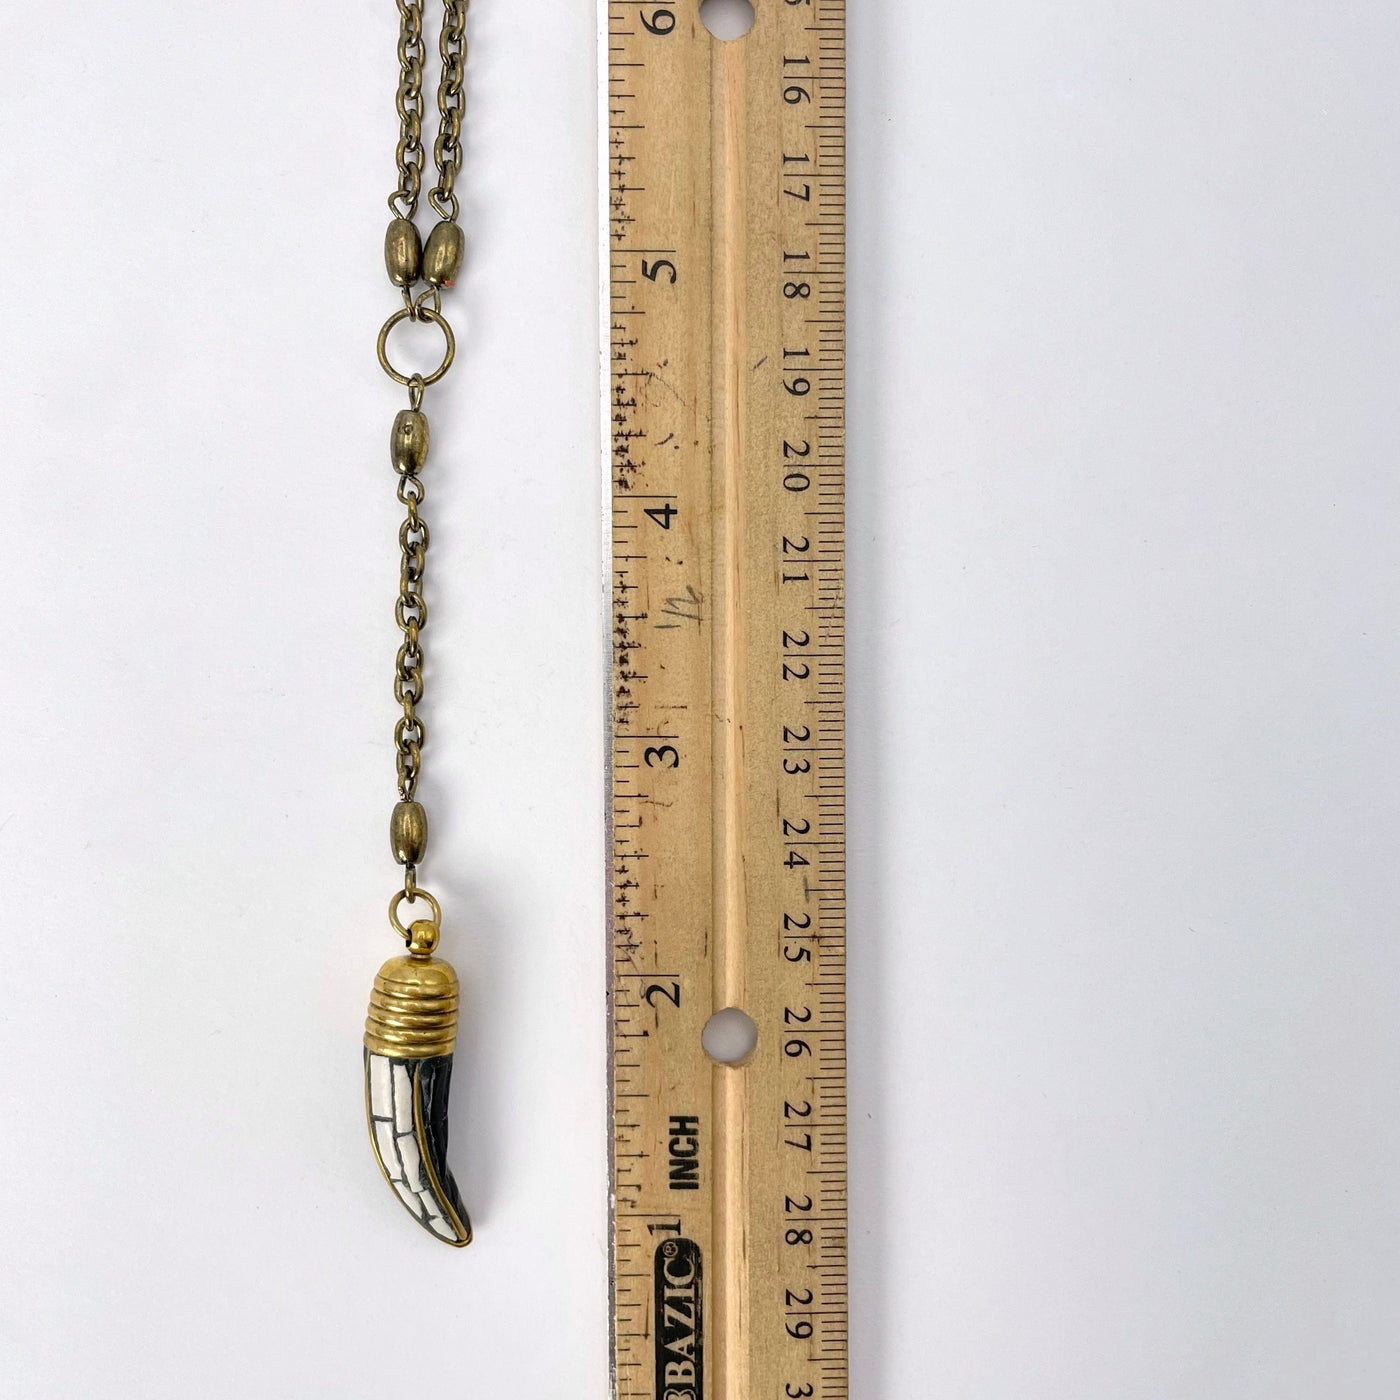 pendant chain and horn pendant with ruler for size reference